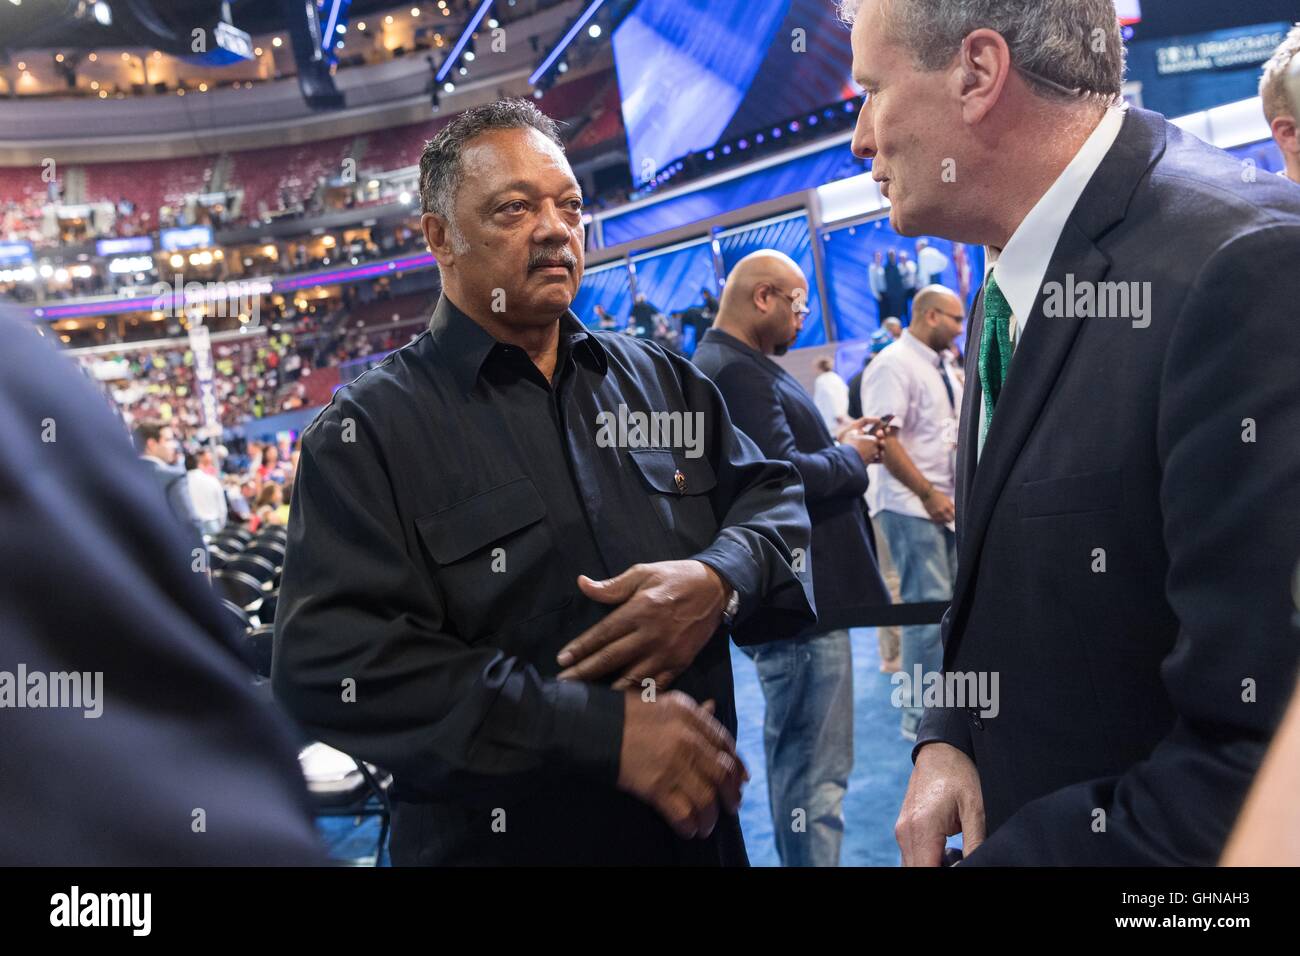 Civil Rights leader Rev. Jesse Jackson on the delegate floor before the start of the final day of the Democratic National Convention at the Wells Fargo Center July 28, 2016 in Philadelphia, Pennsylvania. Stock Photo